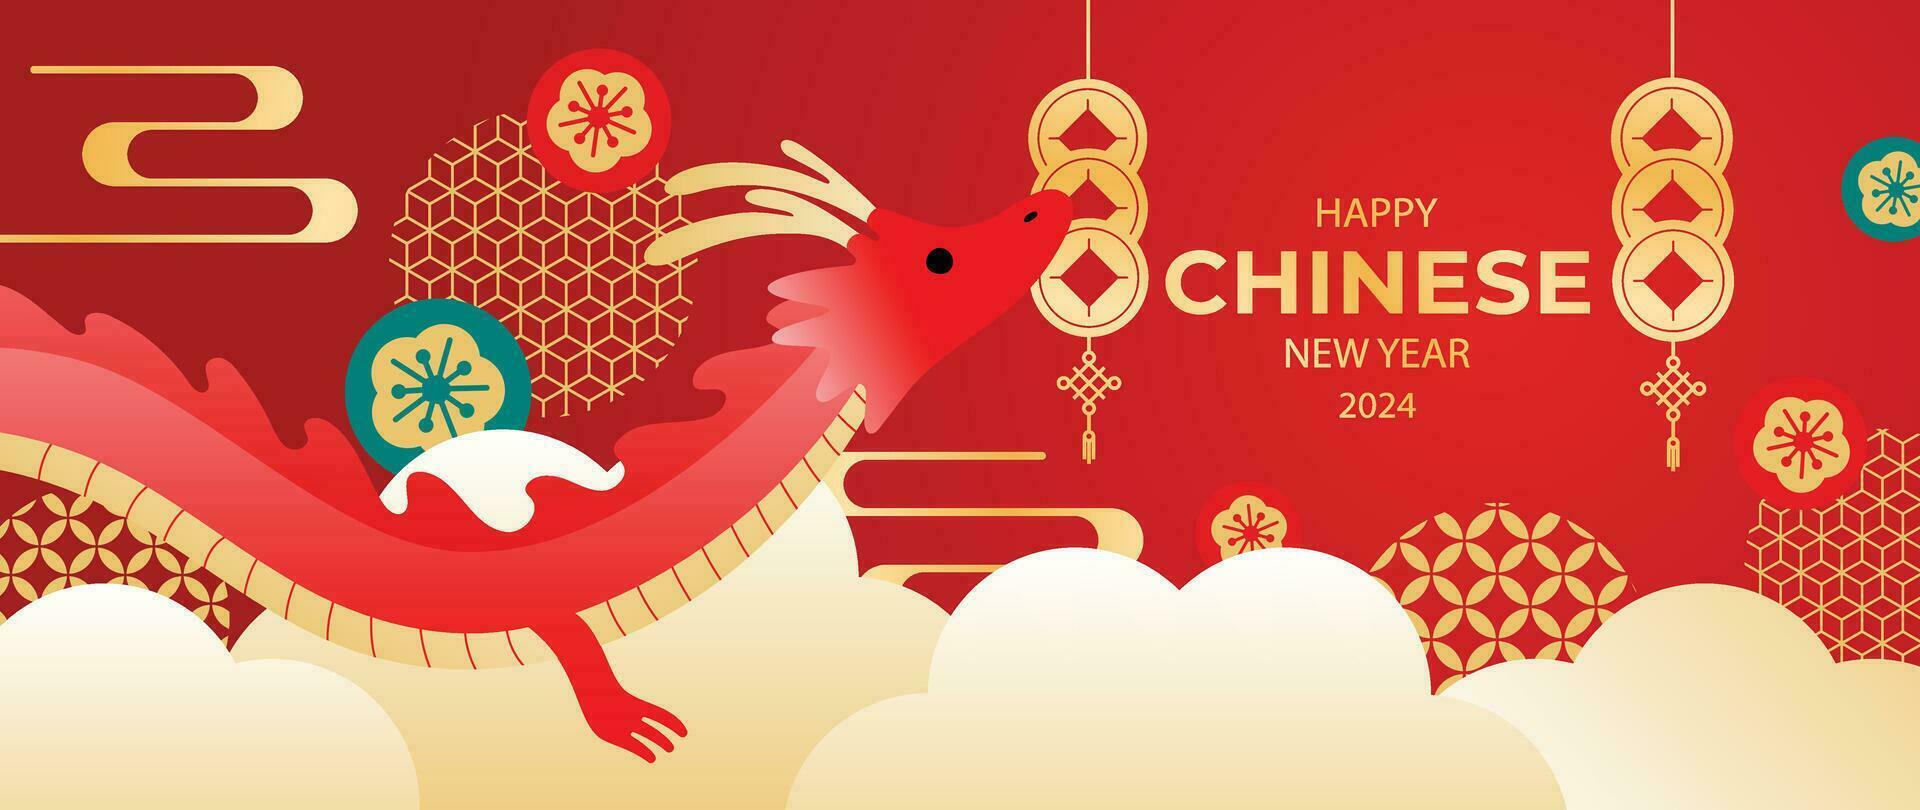 Happy Chinese new year background vector. Year of the dragon design wallpaper with dragon, hanging coin, cloud, pattern. Modern luxury oriental illustration for cover, banner, website, decor. vector